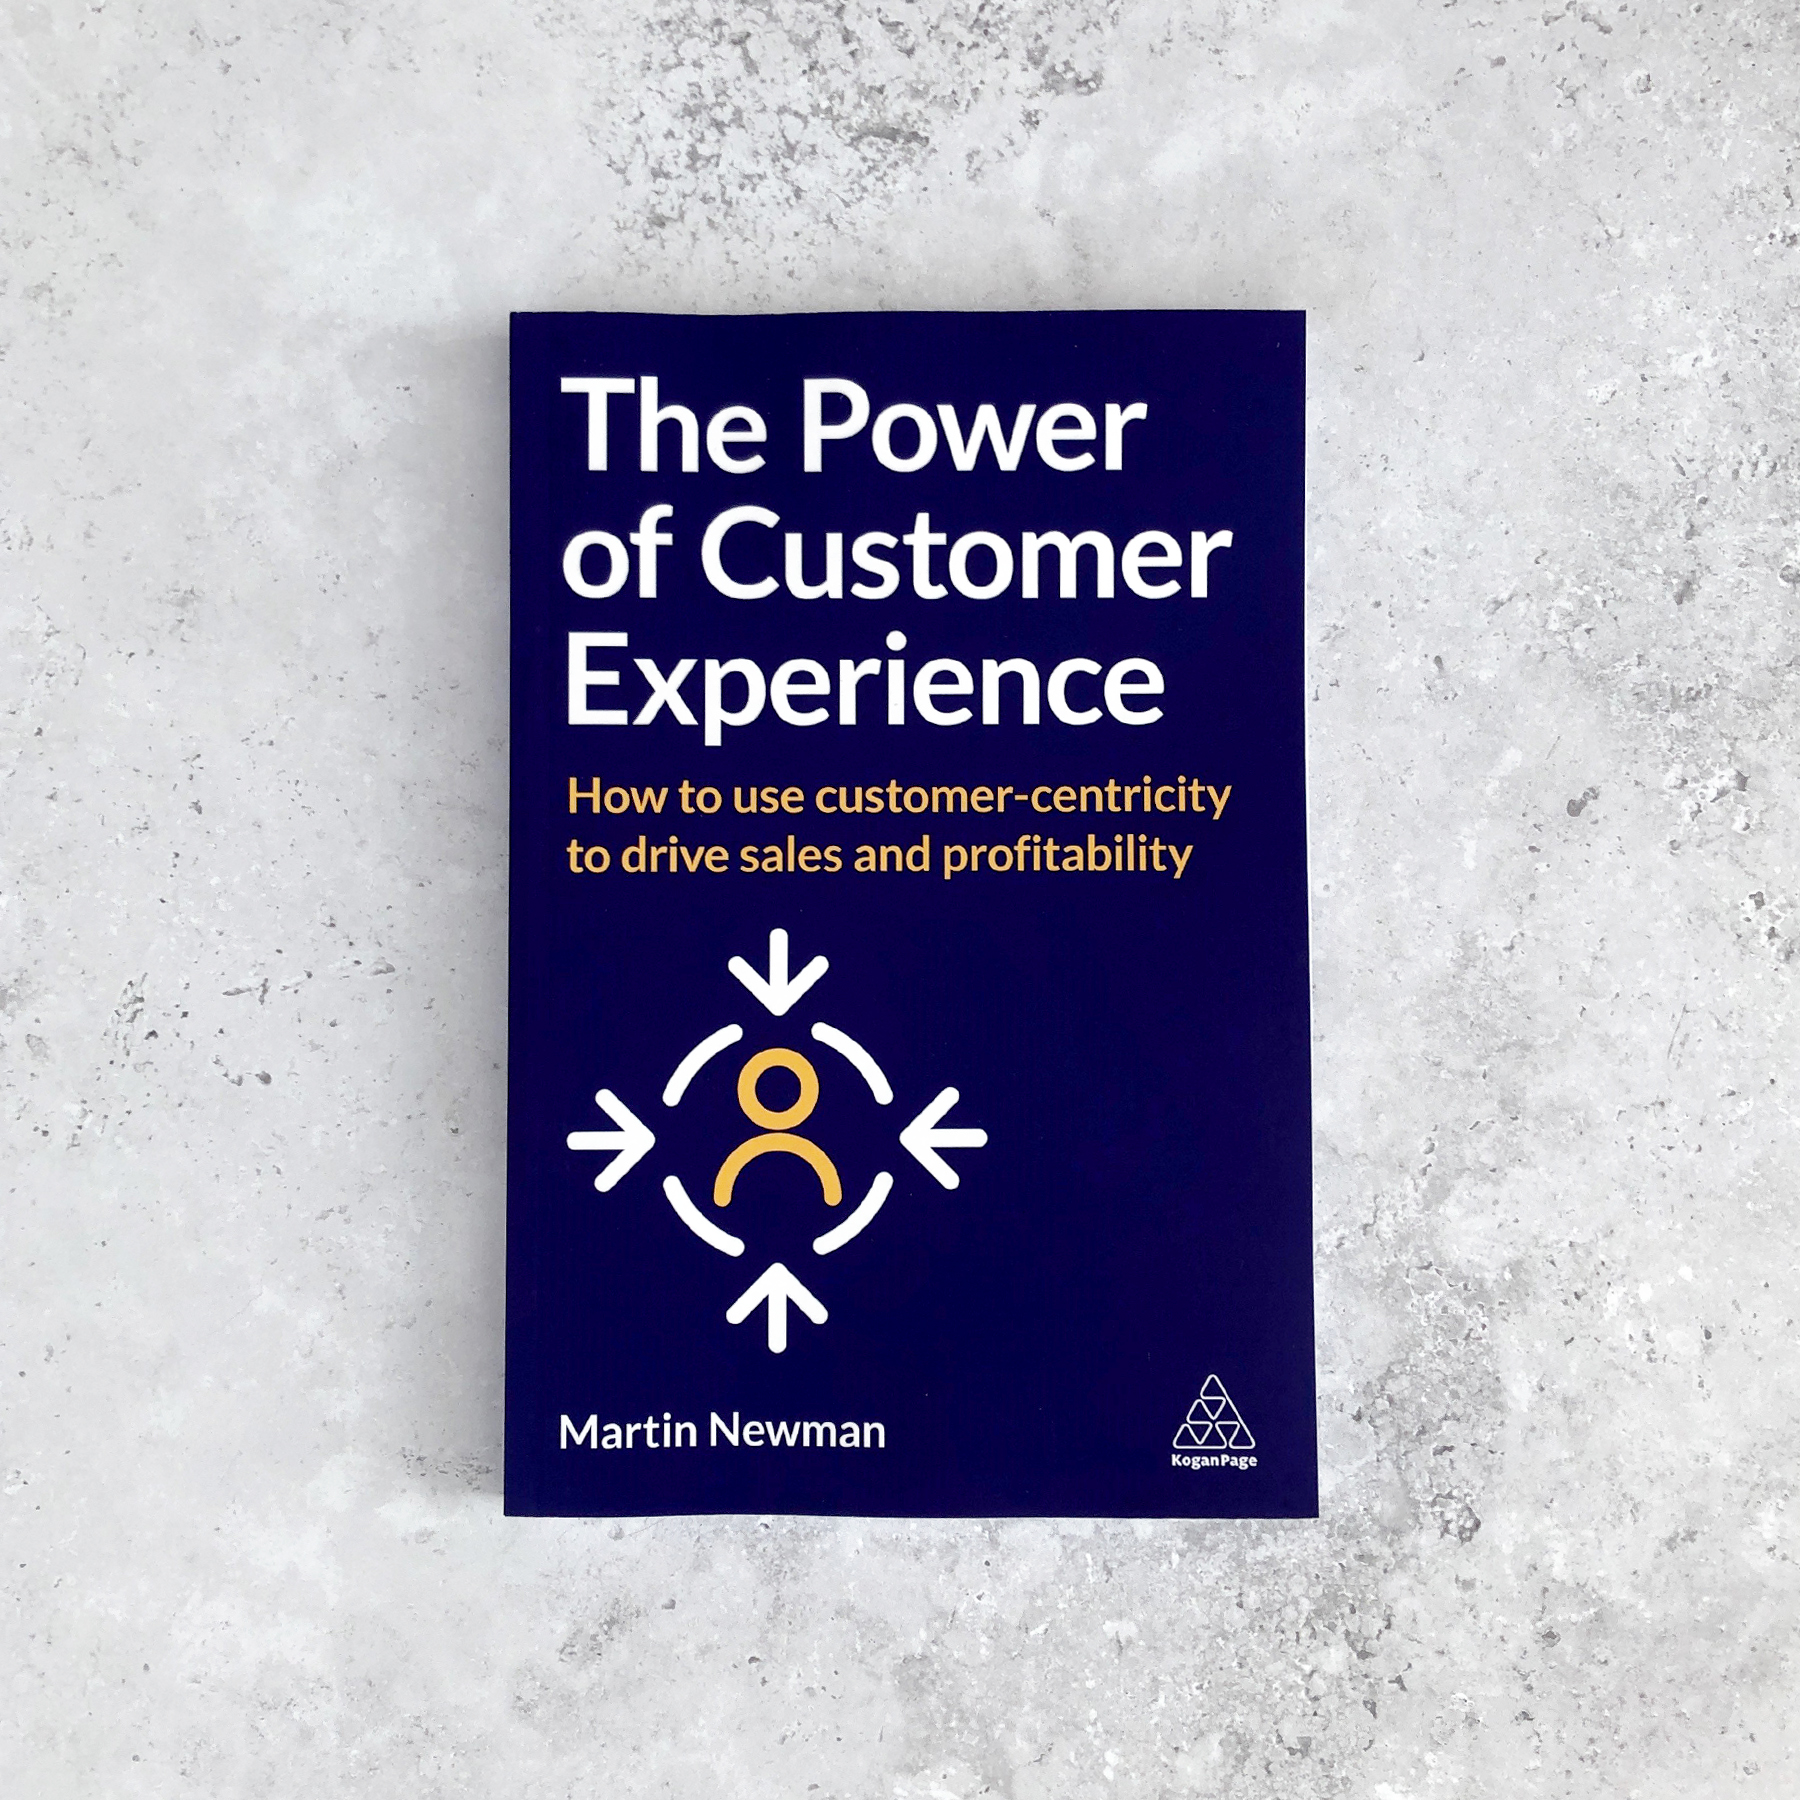 Brand New Book and Mini MBA from Martin Newman Proves Customer Experience is Key to Building a Sustainable Business